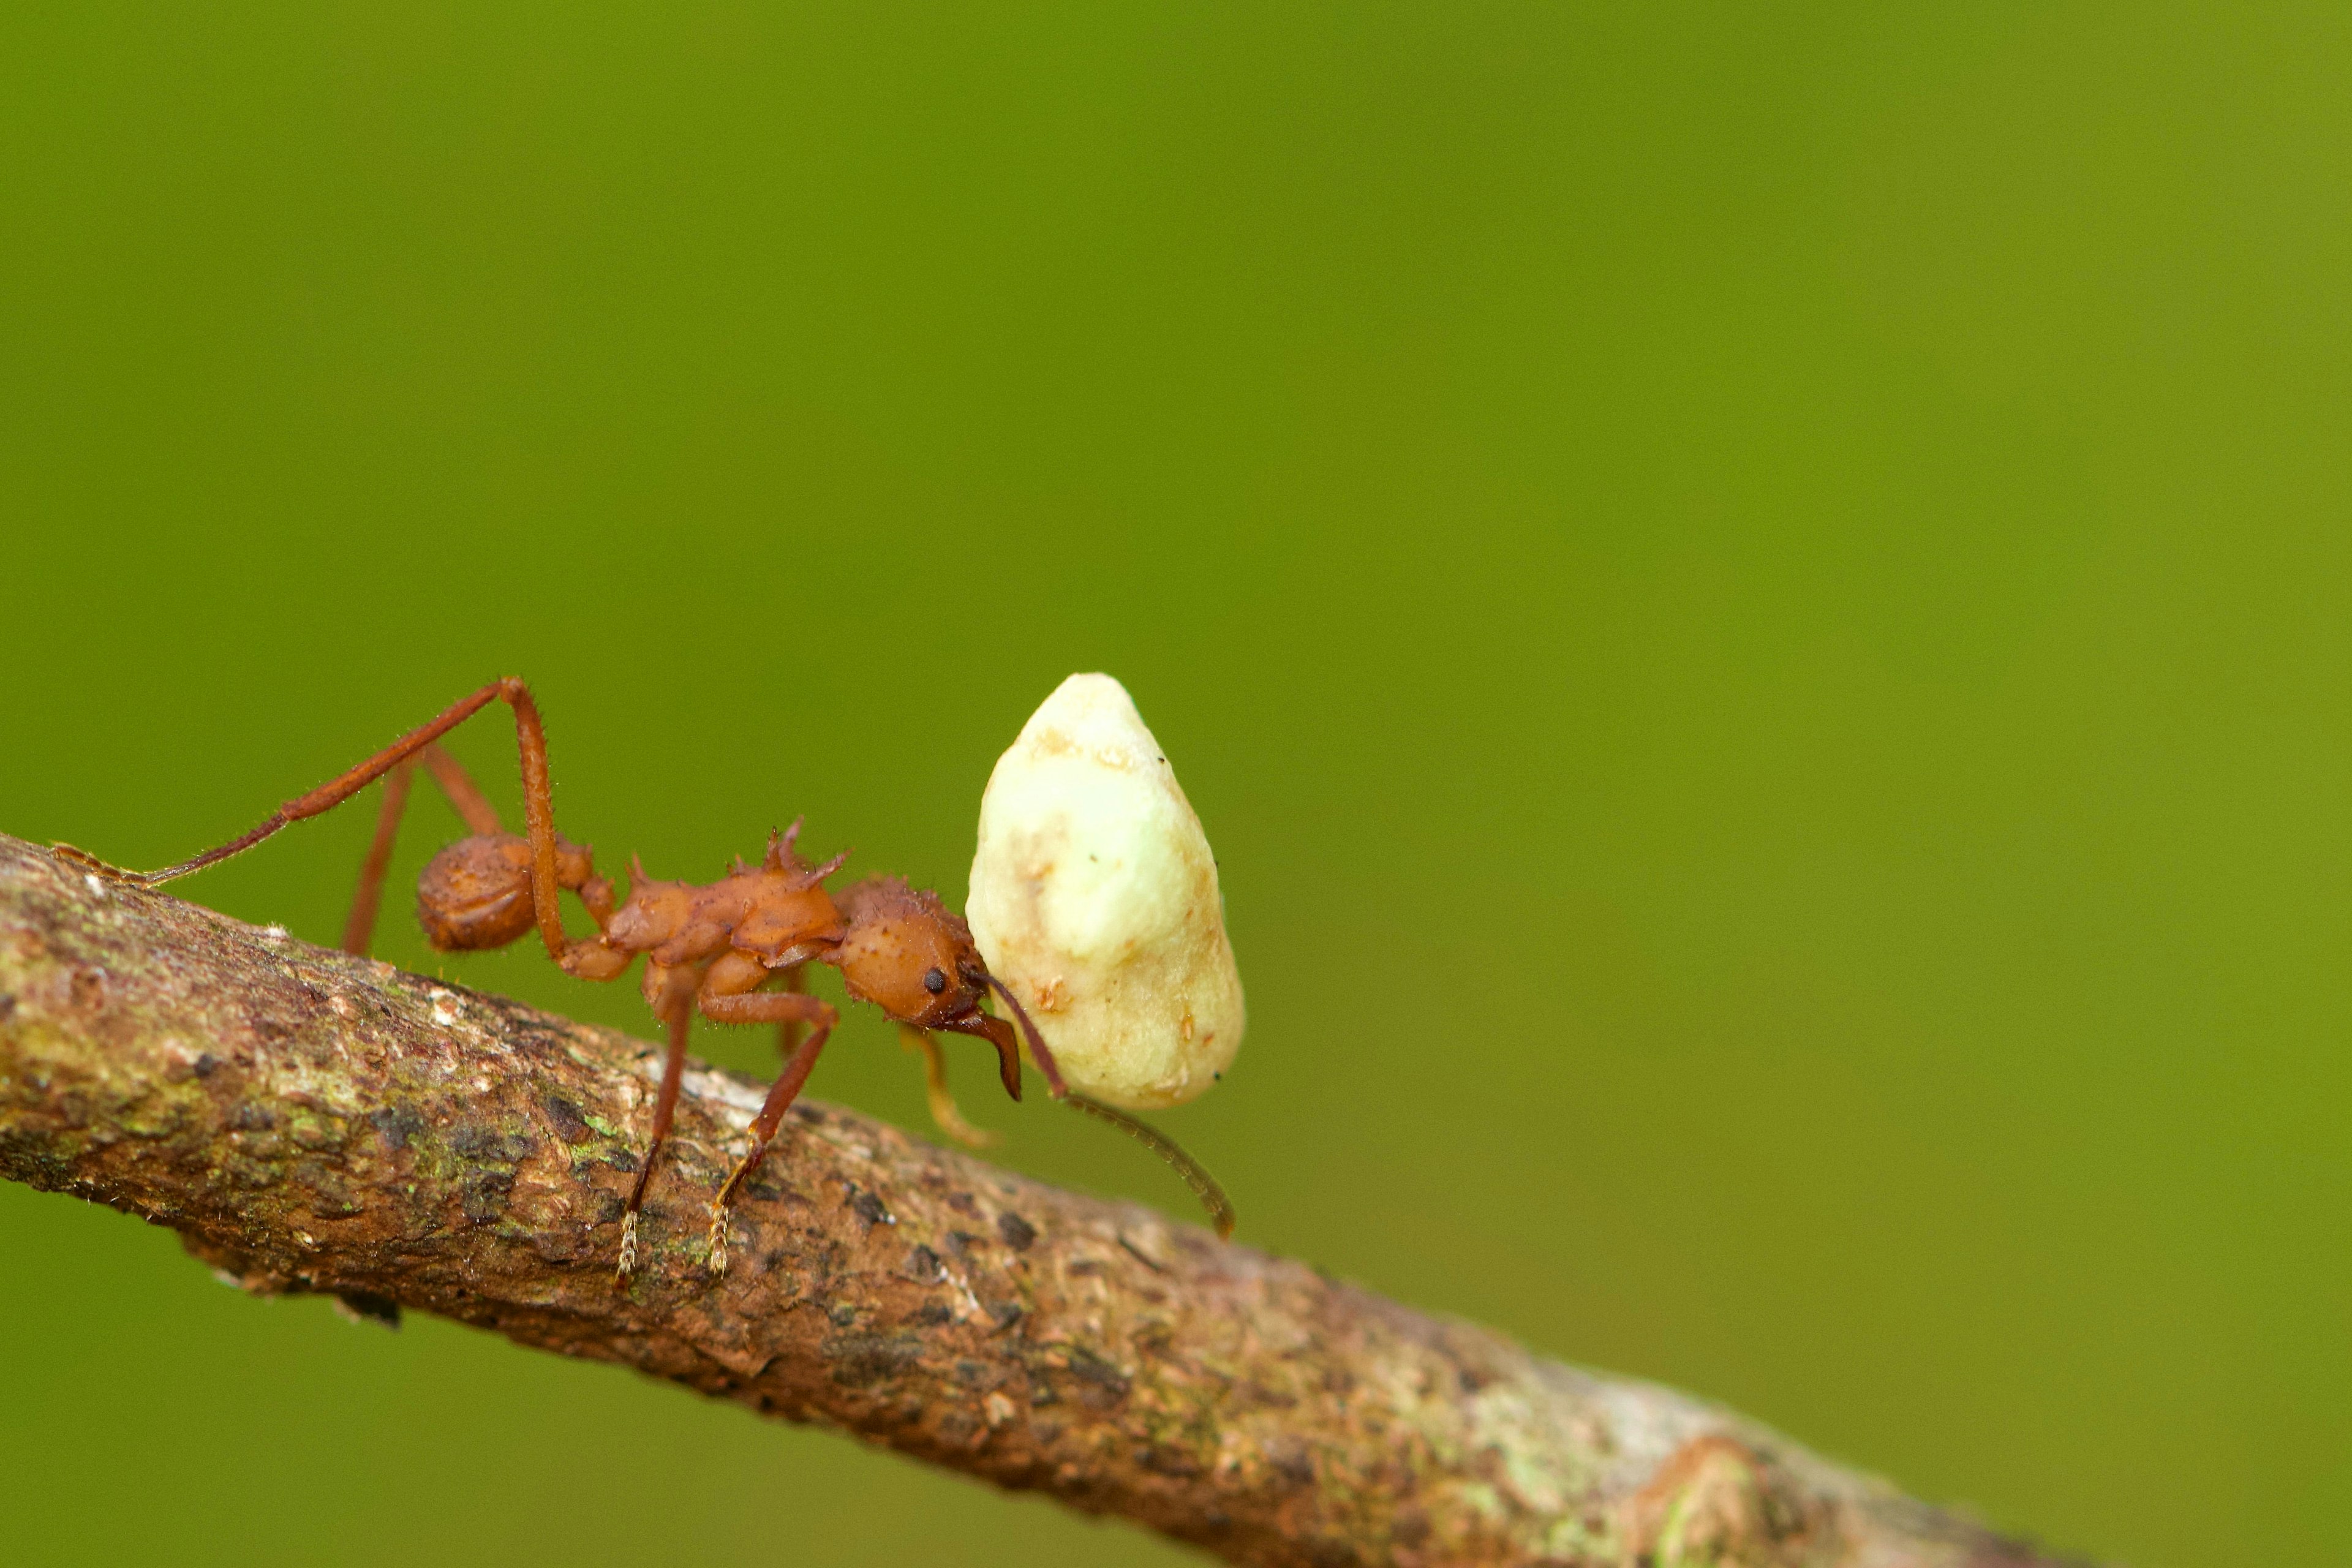 an ant carrying a large white object that looks like a rock